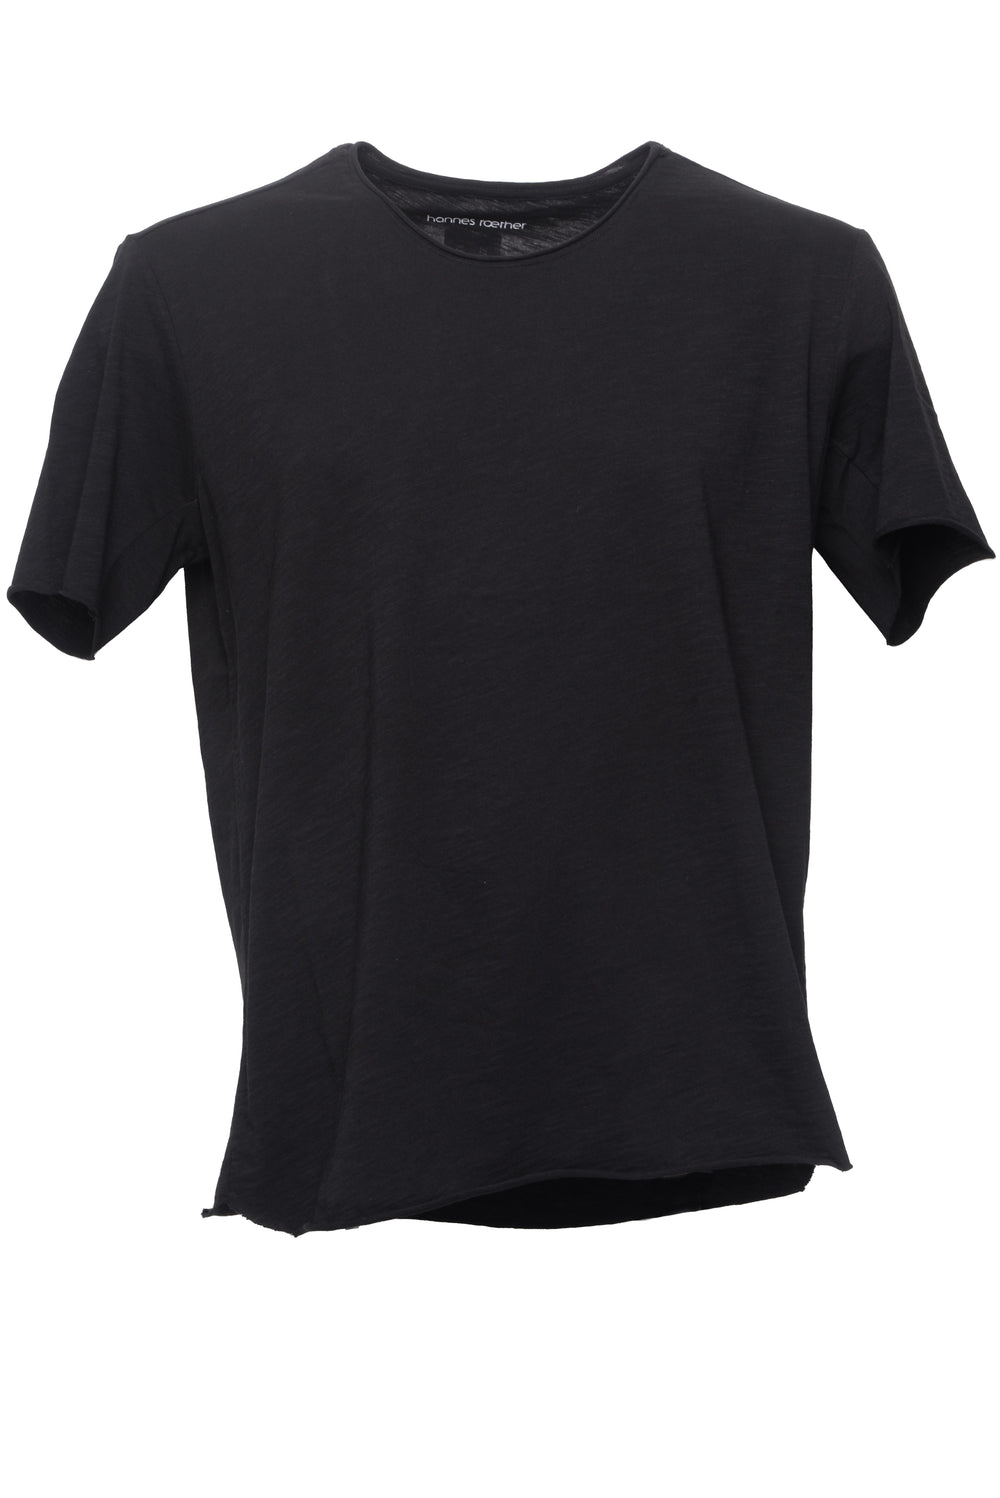 HANNES ROETHER MALE T-SHIRT 111243 100% CO 090 BLACK